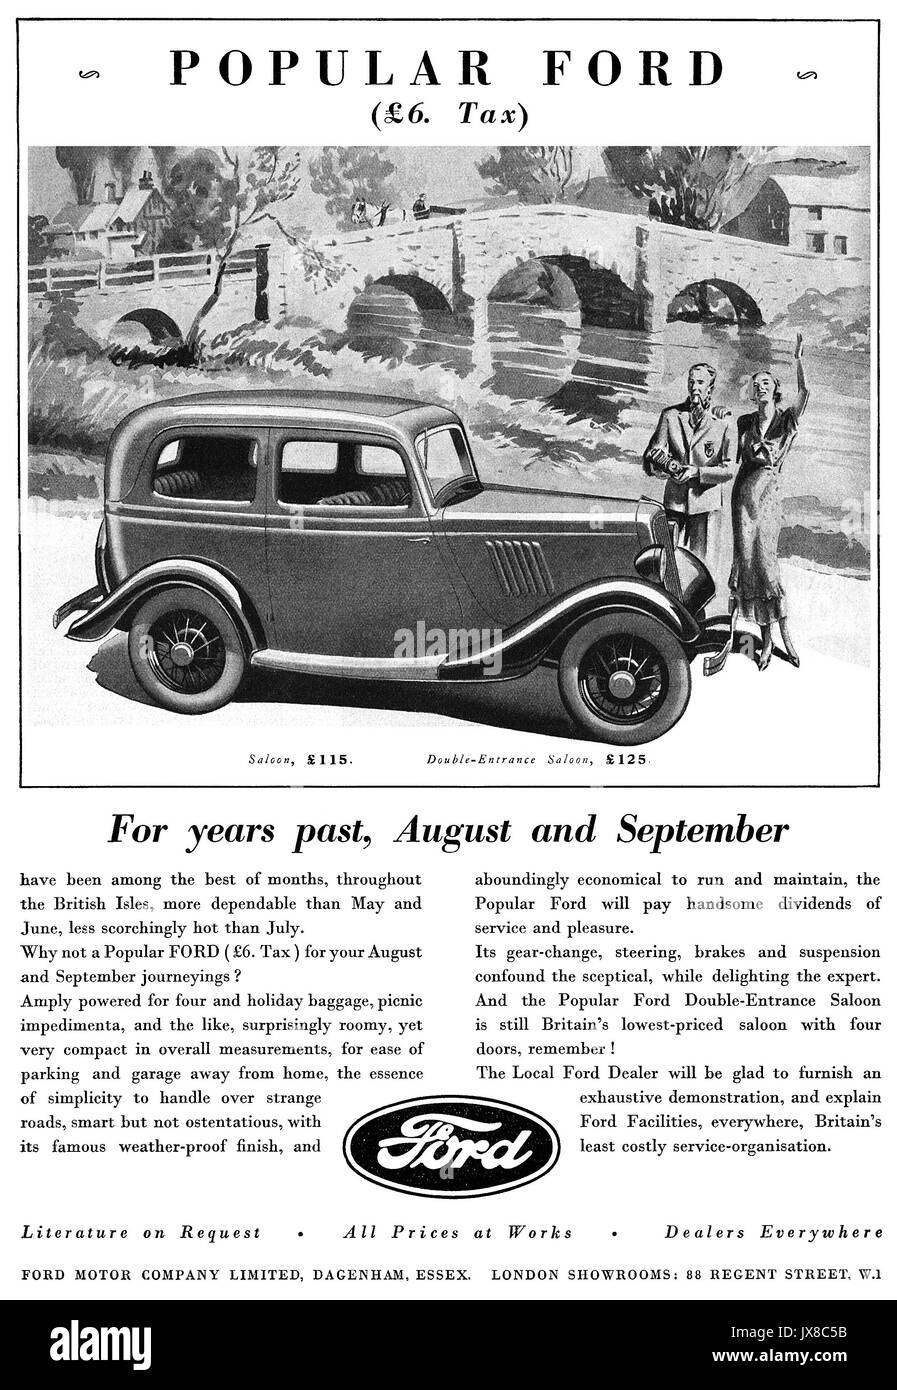 1935 British advertisement for the Popular Ford motor car. Stock Photo